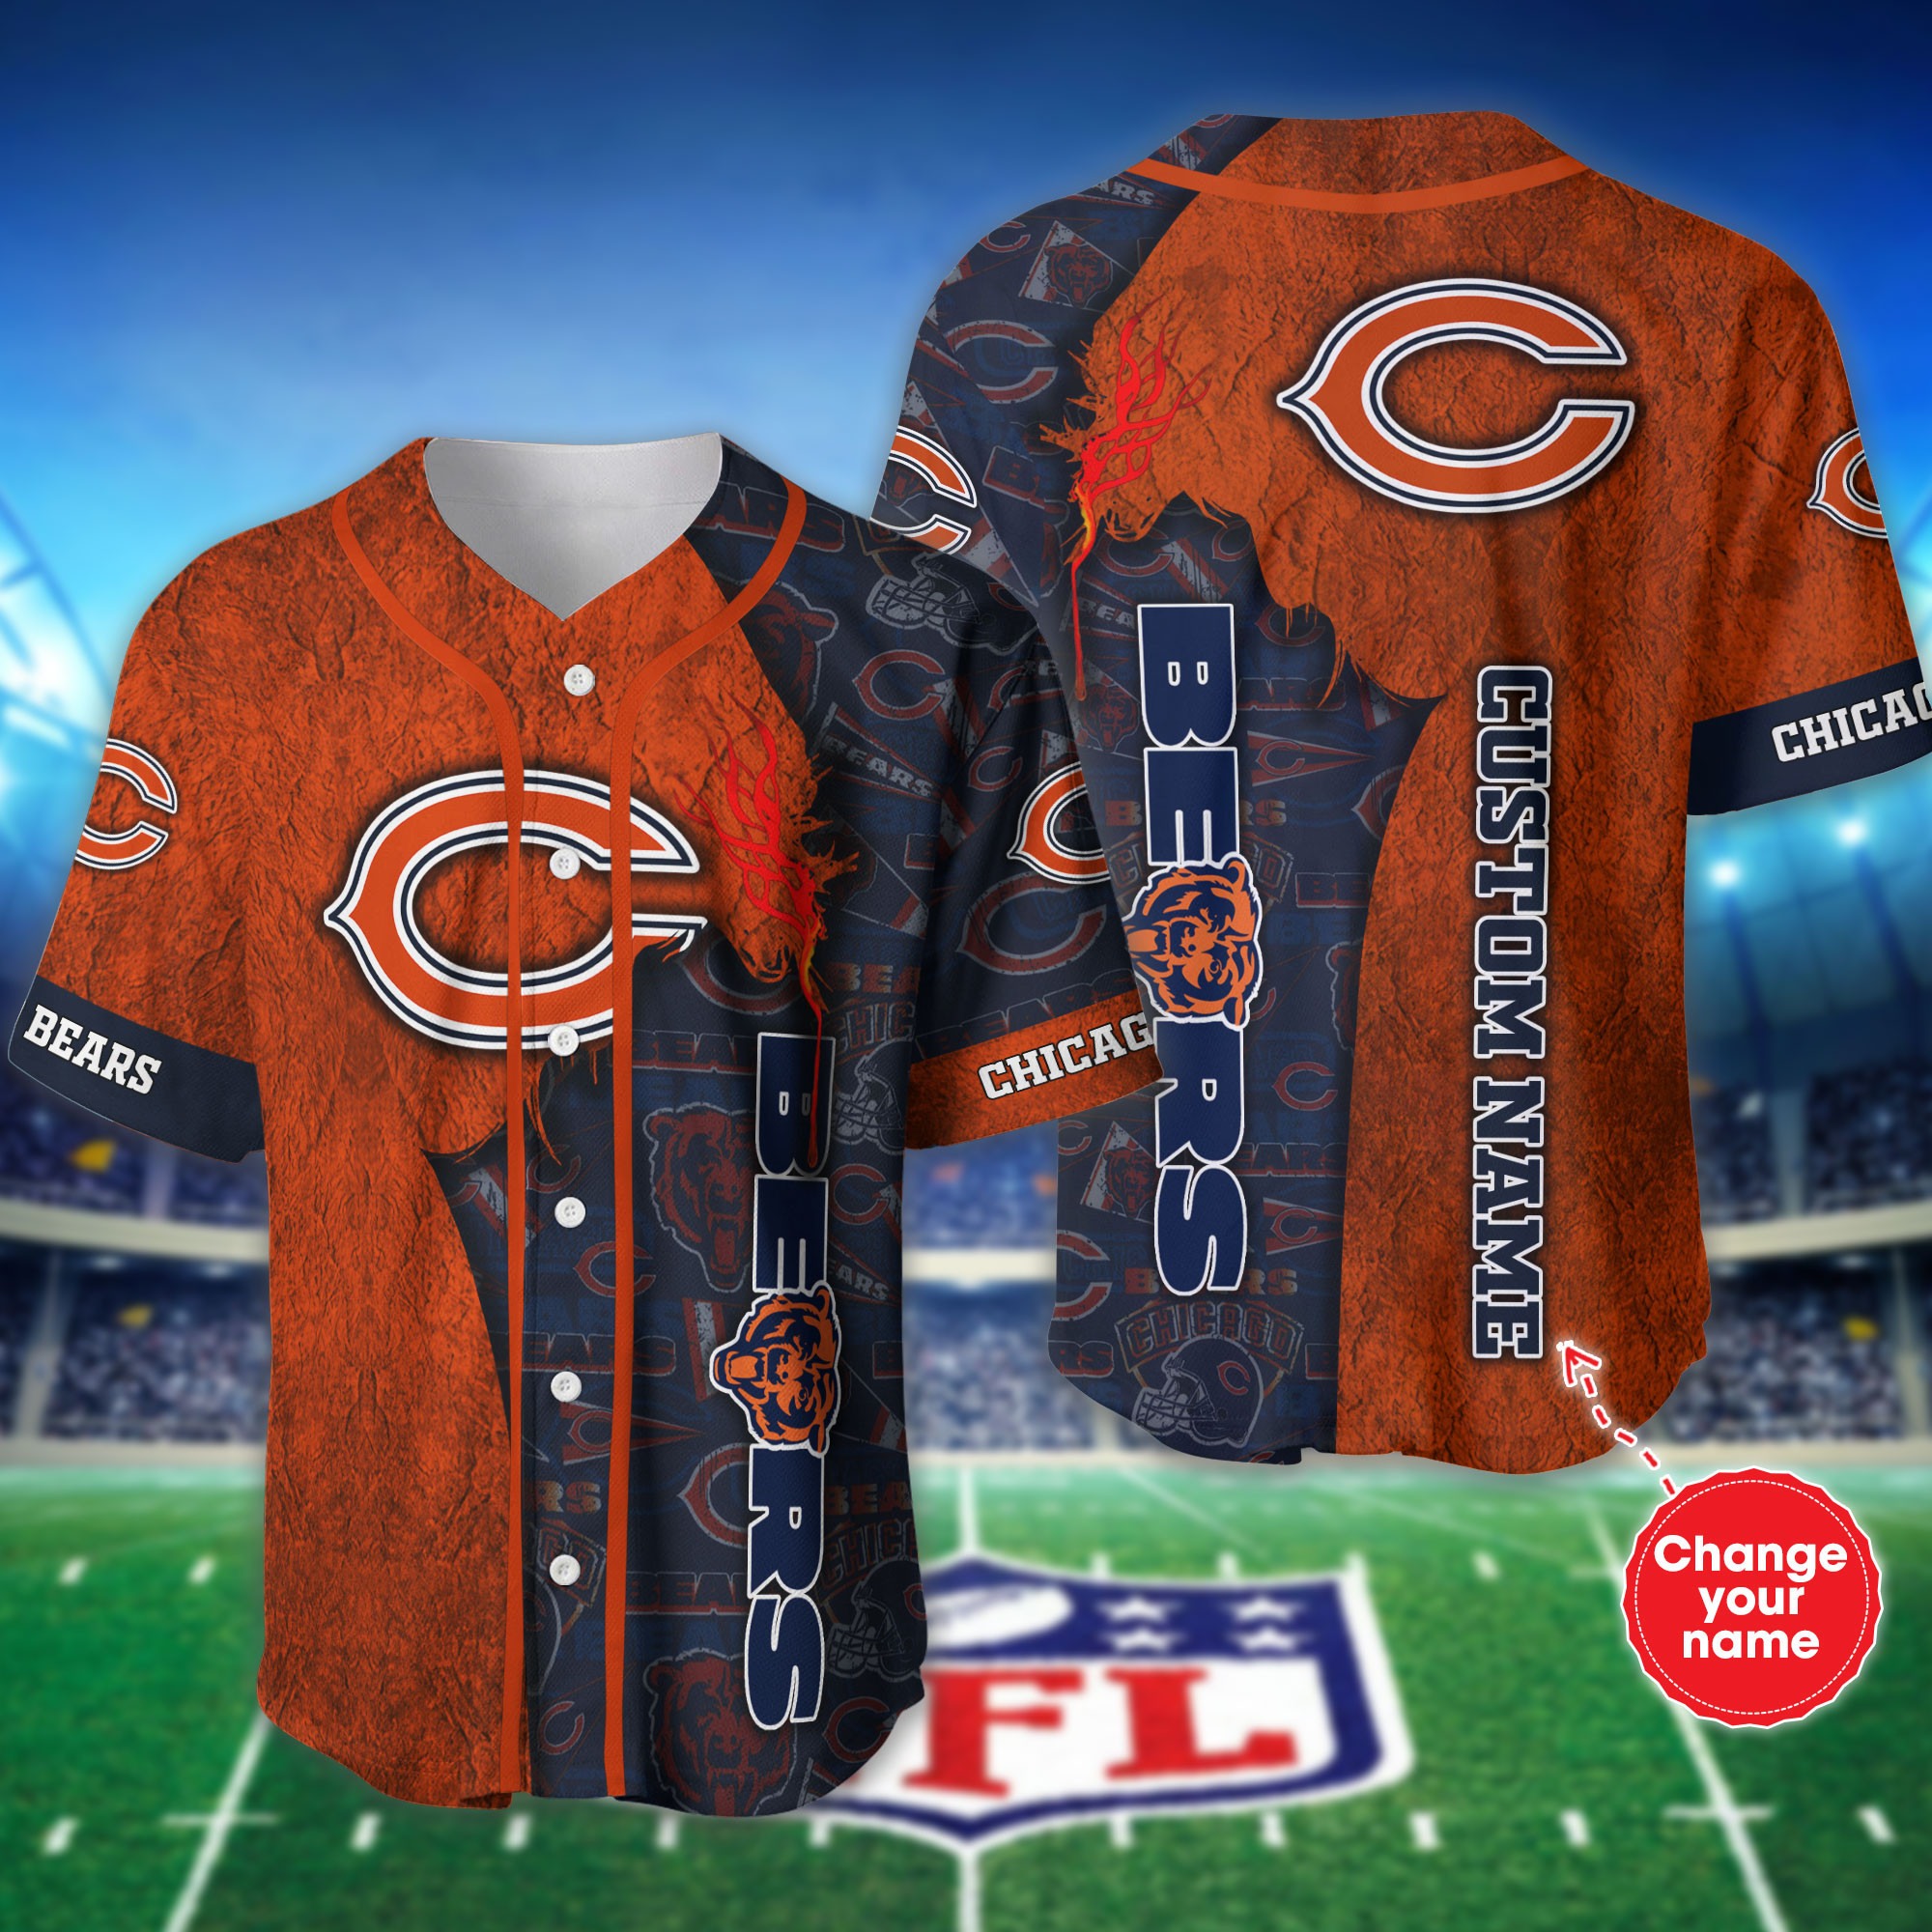 Personalized Chicago Bears Baseball jersey shirt for fans